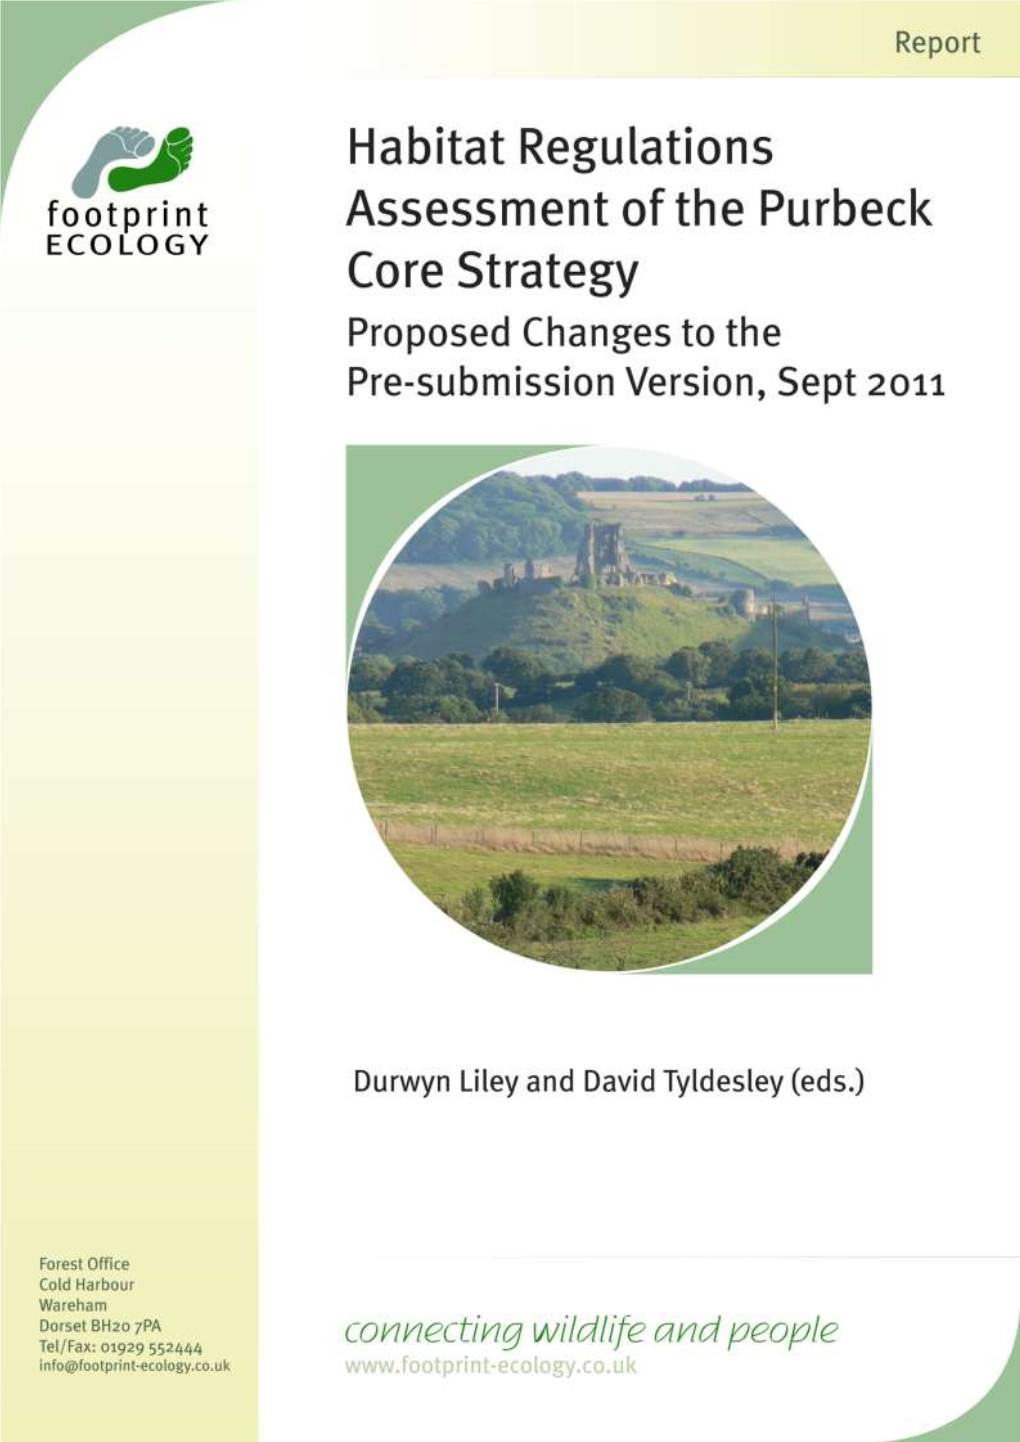 Habitats Regulations Assessment of Purbeck Core Strategy; Proposed Changes to Pre-Submission